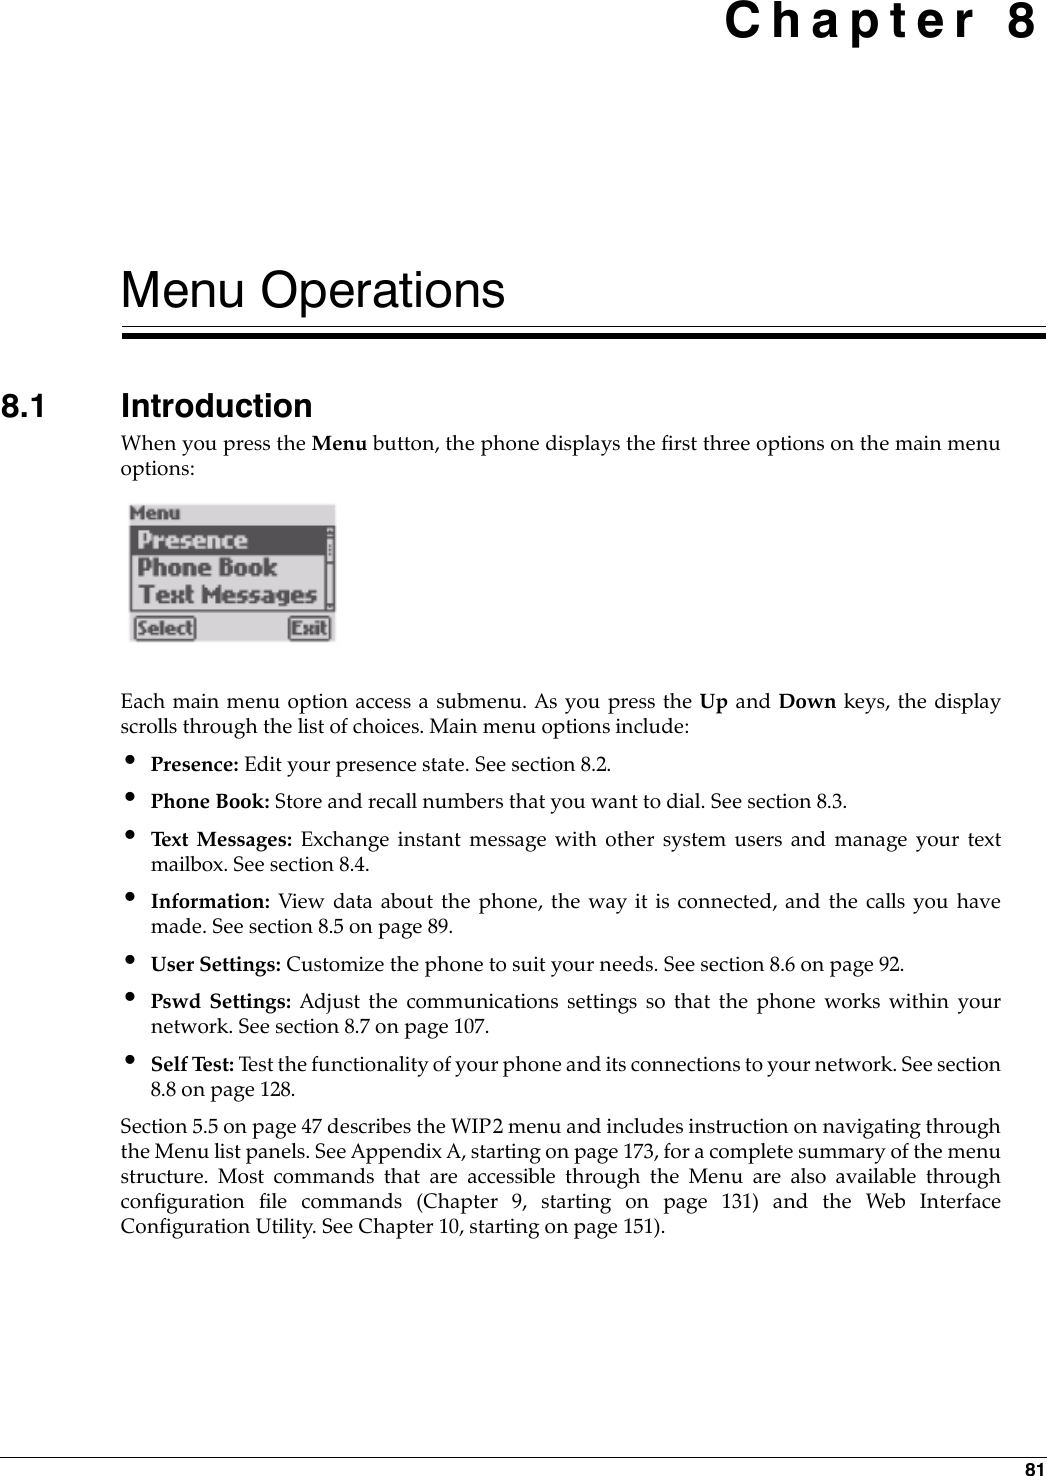 81 Chapter 8Menu Operations8.1 IntroductionWhen you press the Menu button, the phone displays the first three options on the main menuoptions:Each main menu option access a submenu. As you press the Up and Down keys, the displayscrolls through the list of choices. Main menu options include:•Presence: Edit your presence state. See section 8.2.•Phone Book: Store and recall numbers that you want to dial. See section 8.3.•Te x t  M e s s a g e s :  Exchange instant message with other system users and manage your textmailbox. See section 8.4.•Information: View data about the phone, the way it is connected, and the calls you havemade. See section 8.5 on page 89.•User Settings: Customize the phone to suit your needs. See section 8.6 on page 92.•Pswd Settings: Adjust the communications settings so that the phone works within yournetwork. See section 8.7 on page 107.•Self Test: Test the functionality of your phone and its connections to your network. See section8.8 on page 128.Section 5.5 on page 47 describes the WIP2 menu and includes instruction on navigating throughthe Menu list panels. See Appendix A, starting on page 173, for a complete summary of the menustructure. Most commands that are accessible through the Menu are also available throughconfiguration file commands (Chapter 9, starting on page 131) and the Web InterfaceConfiguration Utility. See Chapter 10, starting on page 151).